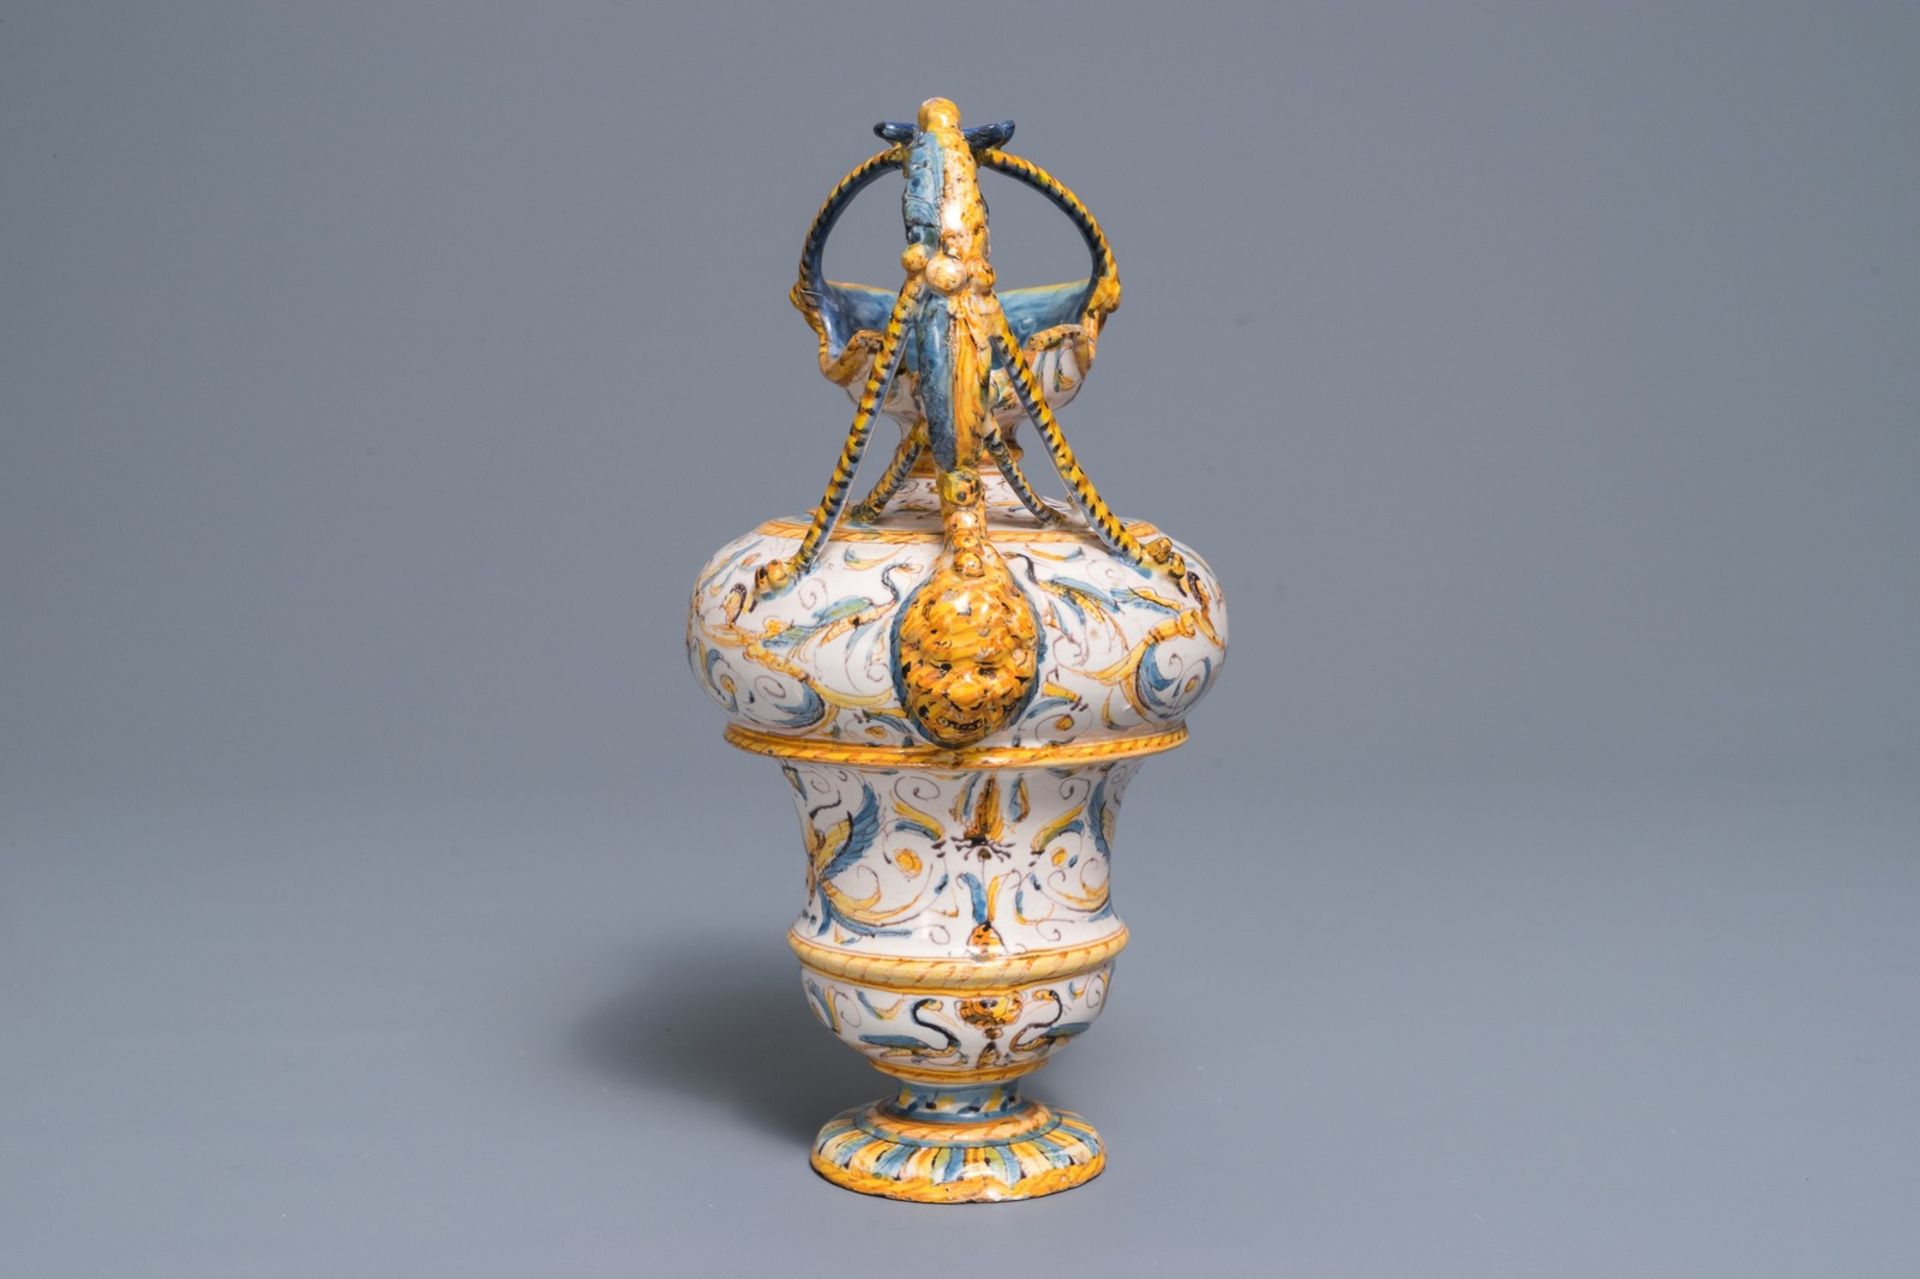 An Italian maiolica jug with grotesques, Caltagirone or Deruta, 17th C. - Image 3 of 7